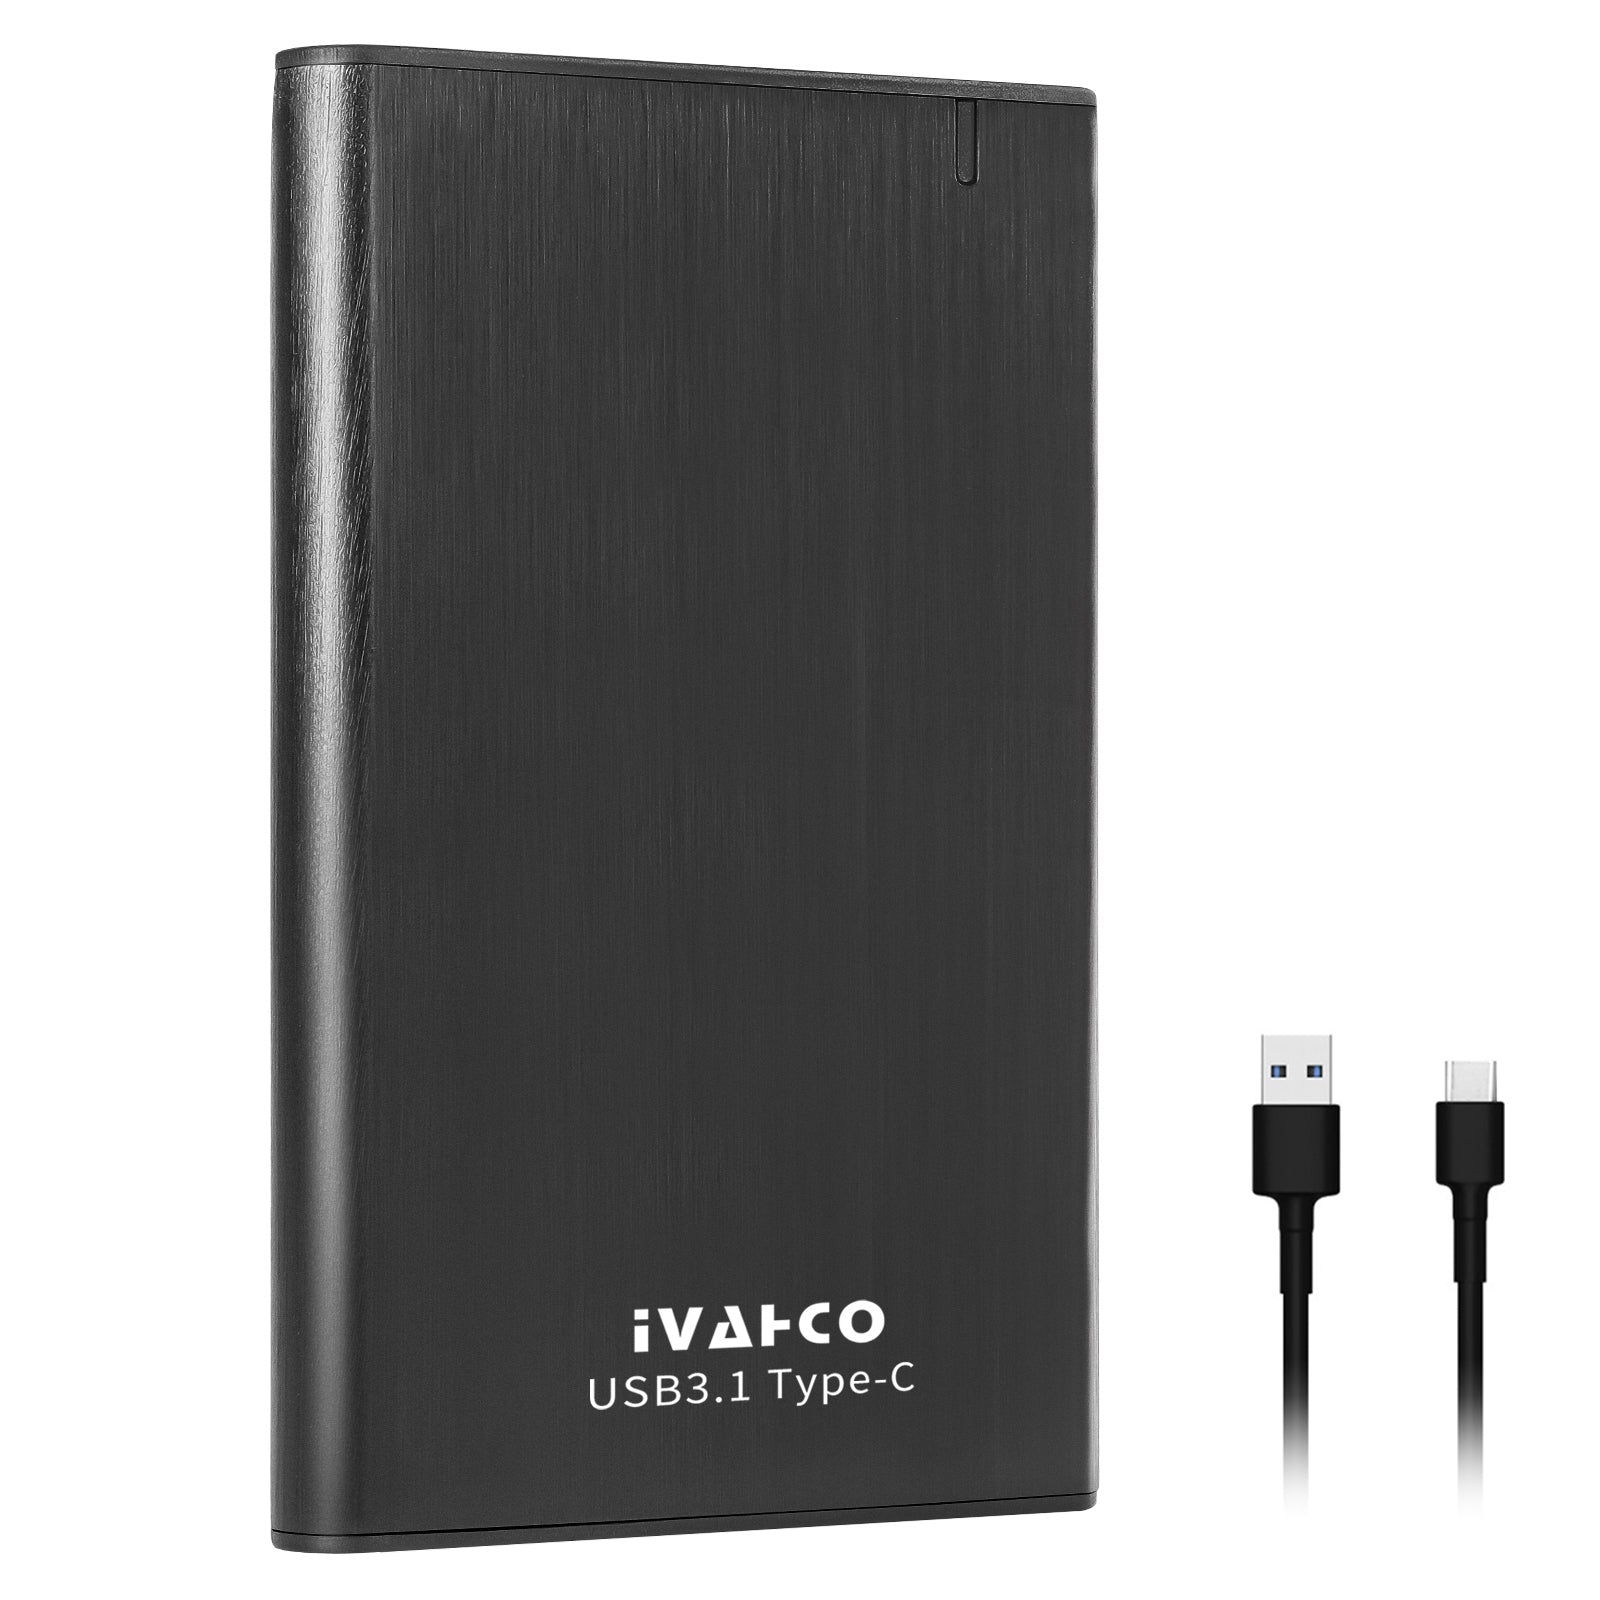 IVAHCO 750GB HDD External Case Type-C USB3.1 2.5" Brushed Metal Solid State Drive Enclosure with Indicator - Black